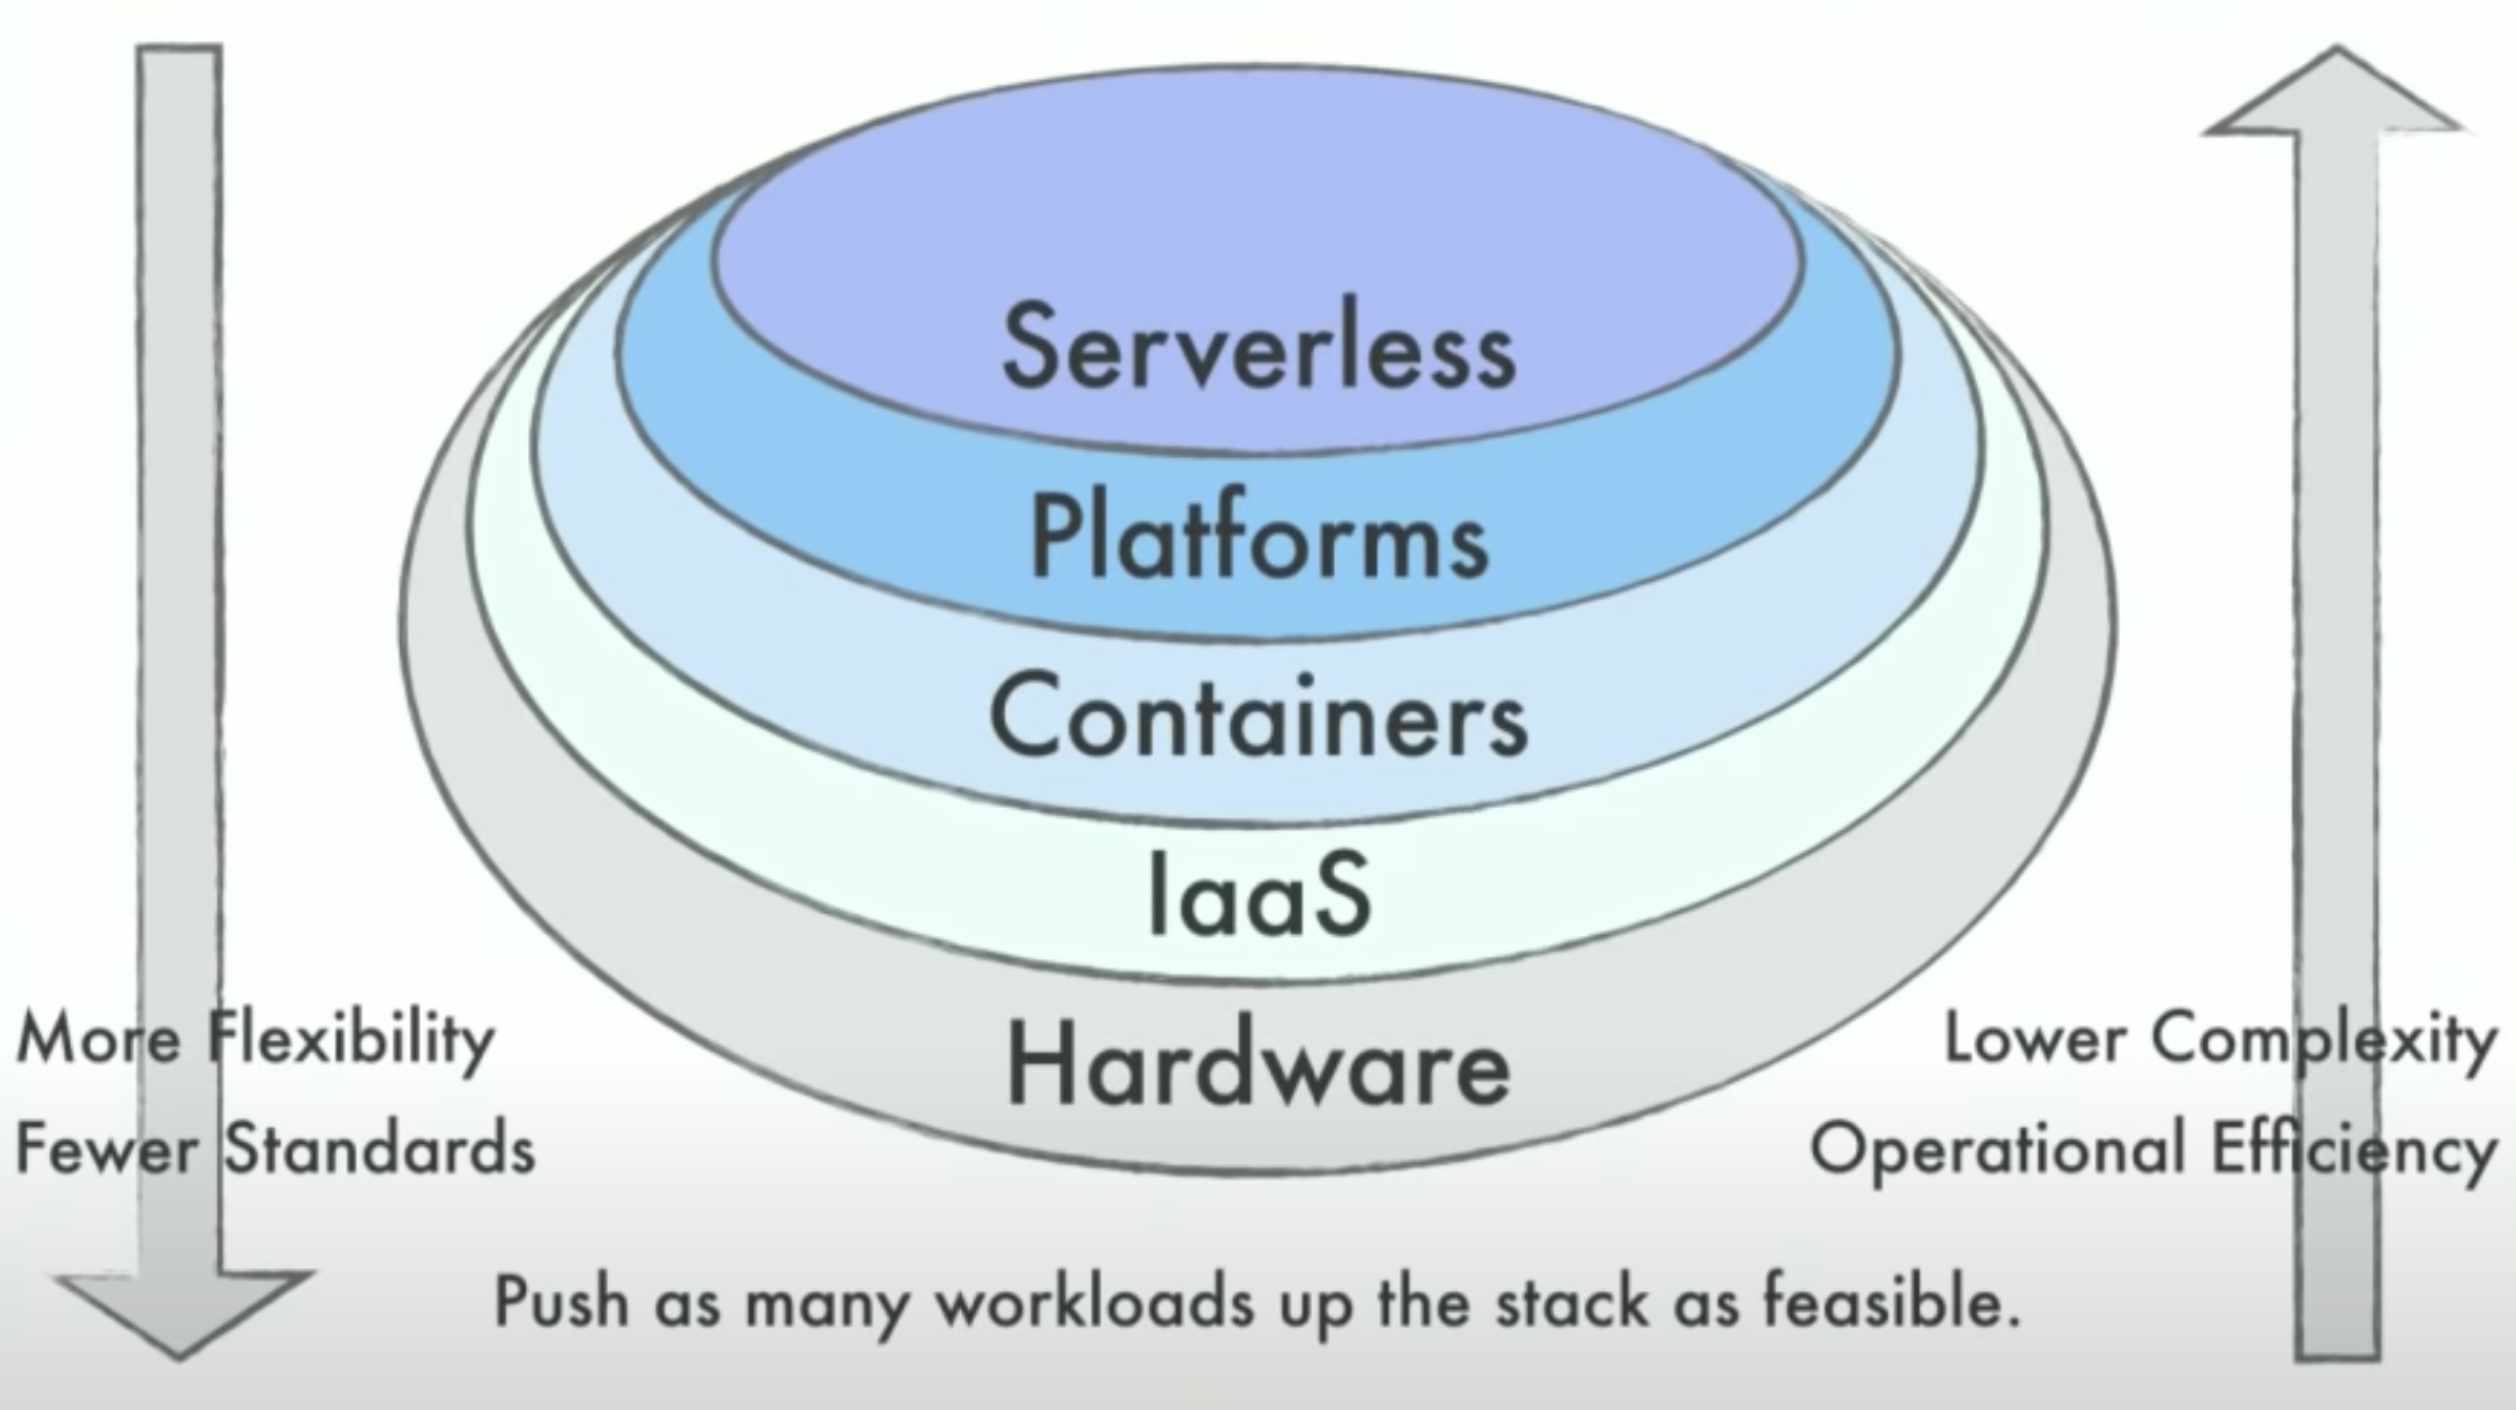 Different levels of cloud service abstractions